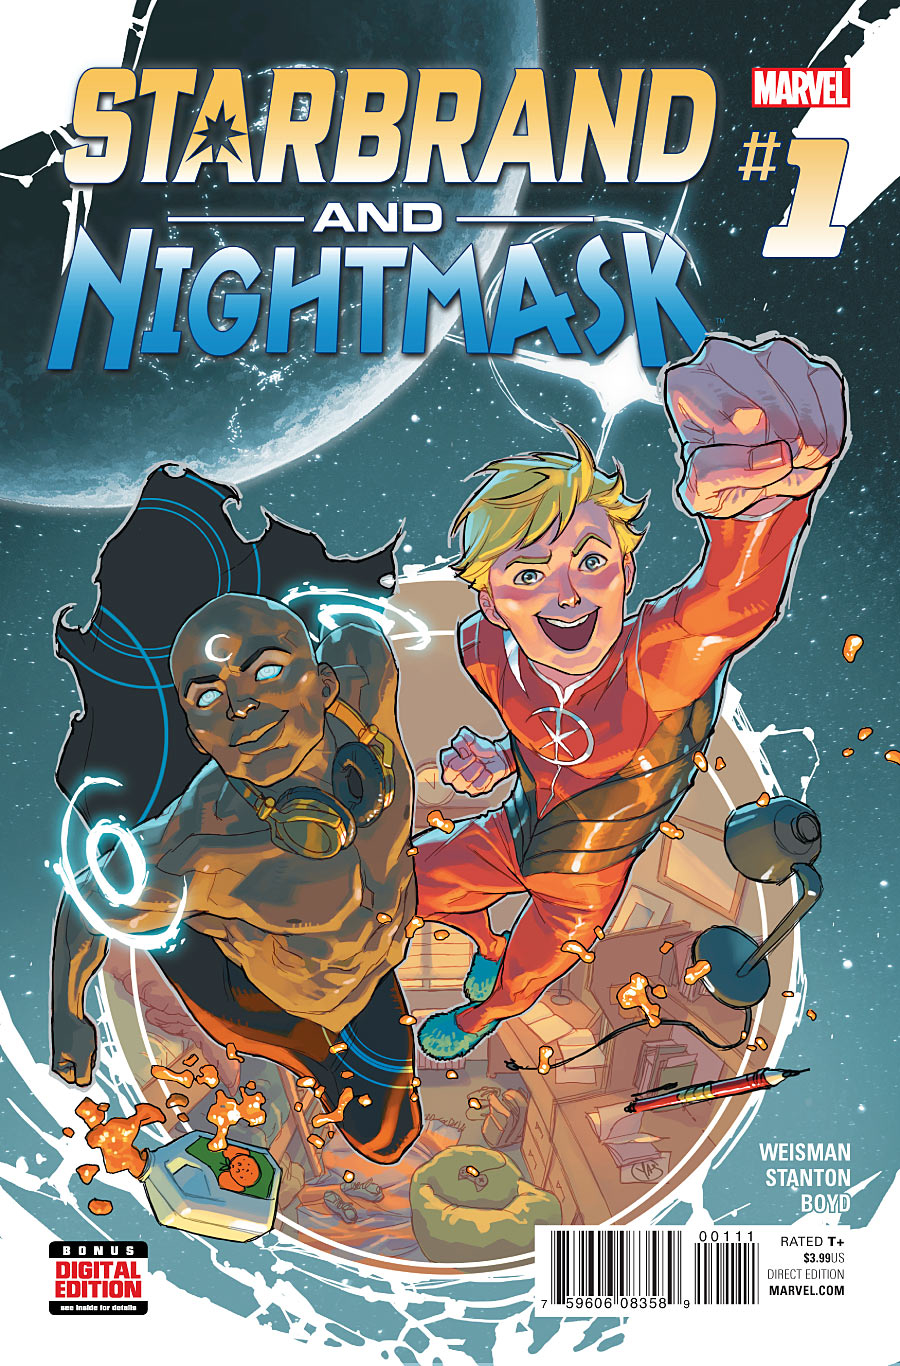 STARBRAND AND NIGHTMASK #1